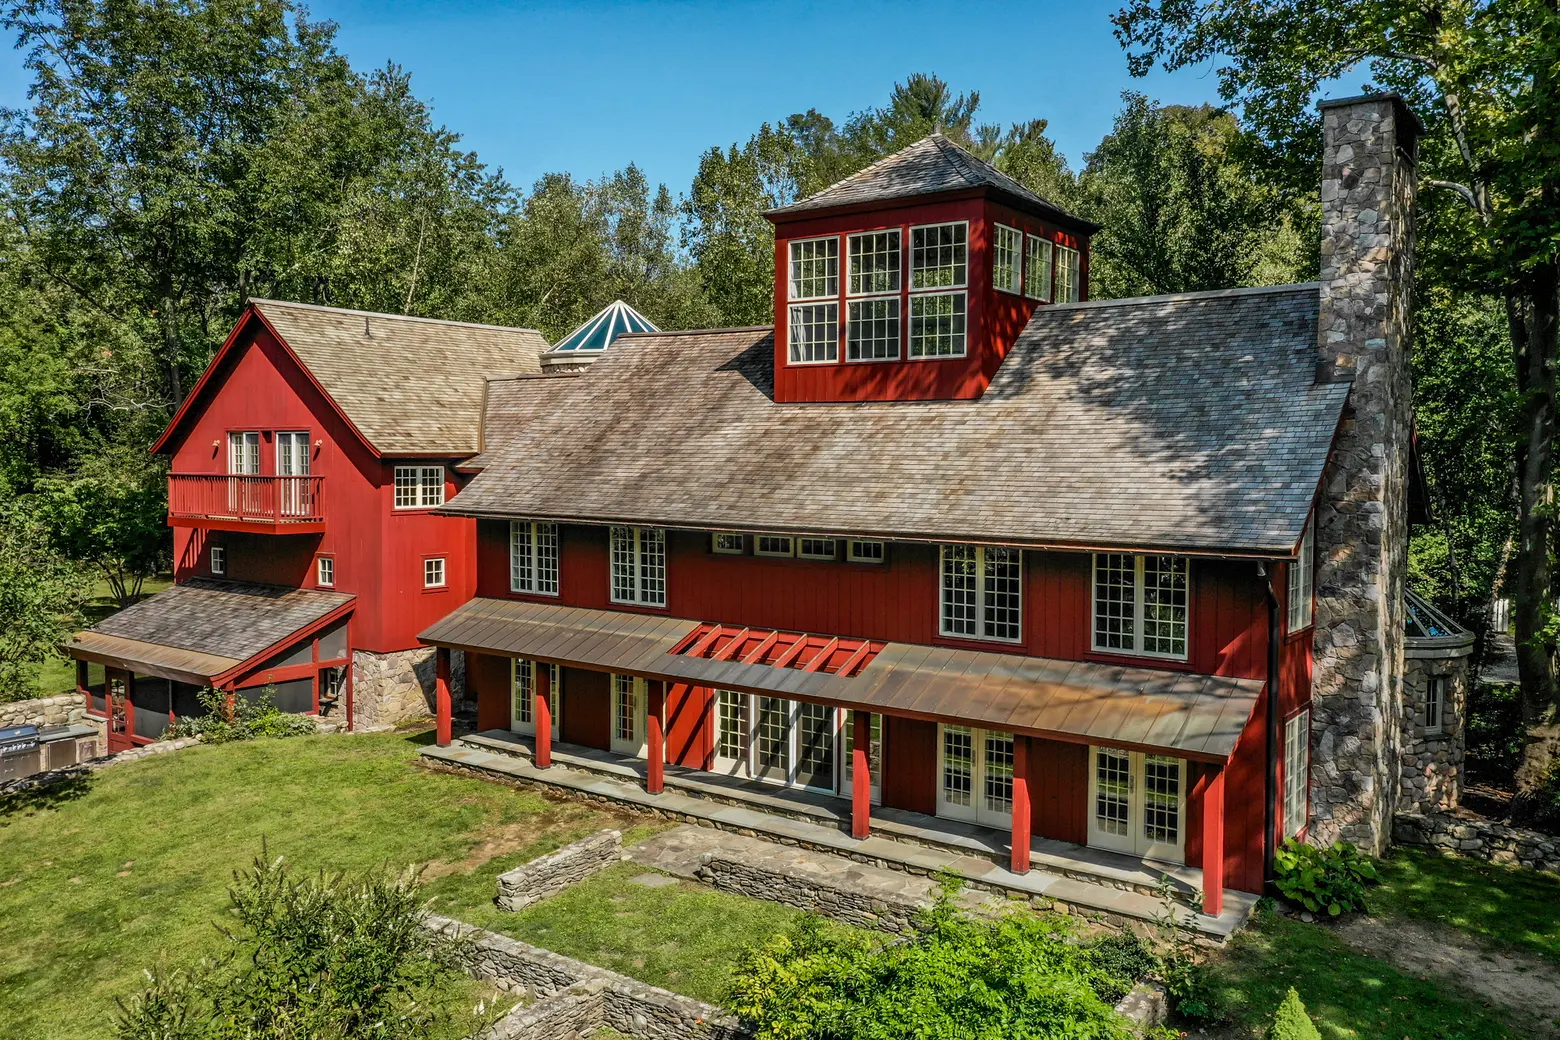 For $2M, a Connecticut estate with a rebuilt barn and ties to the NYC art world